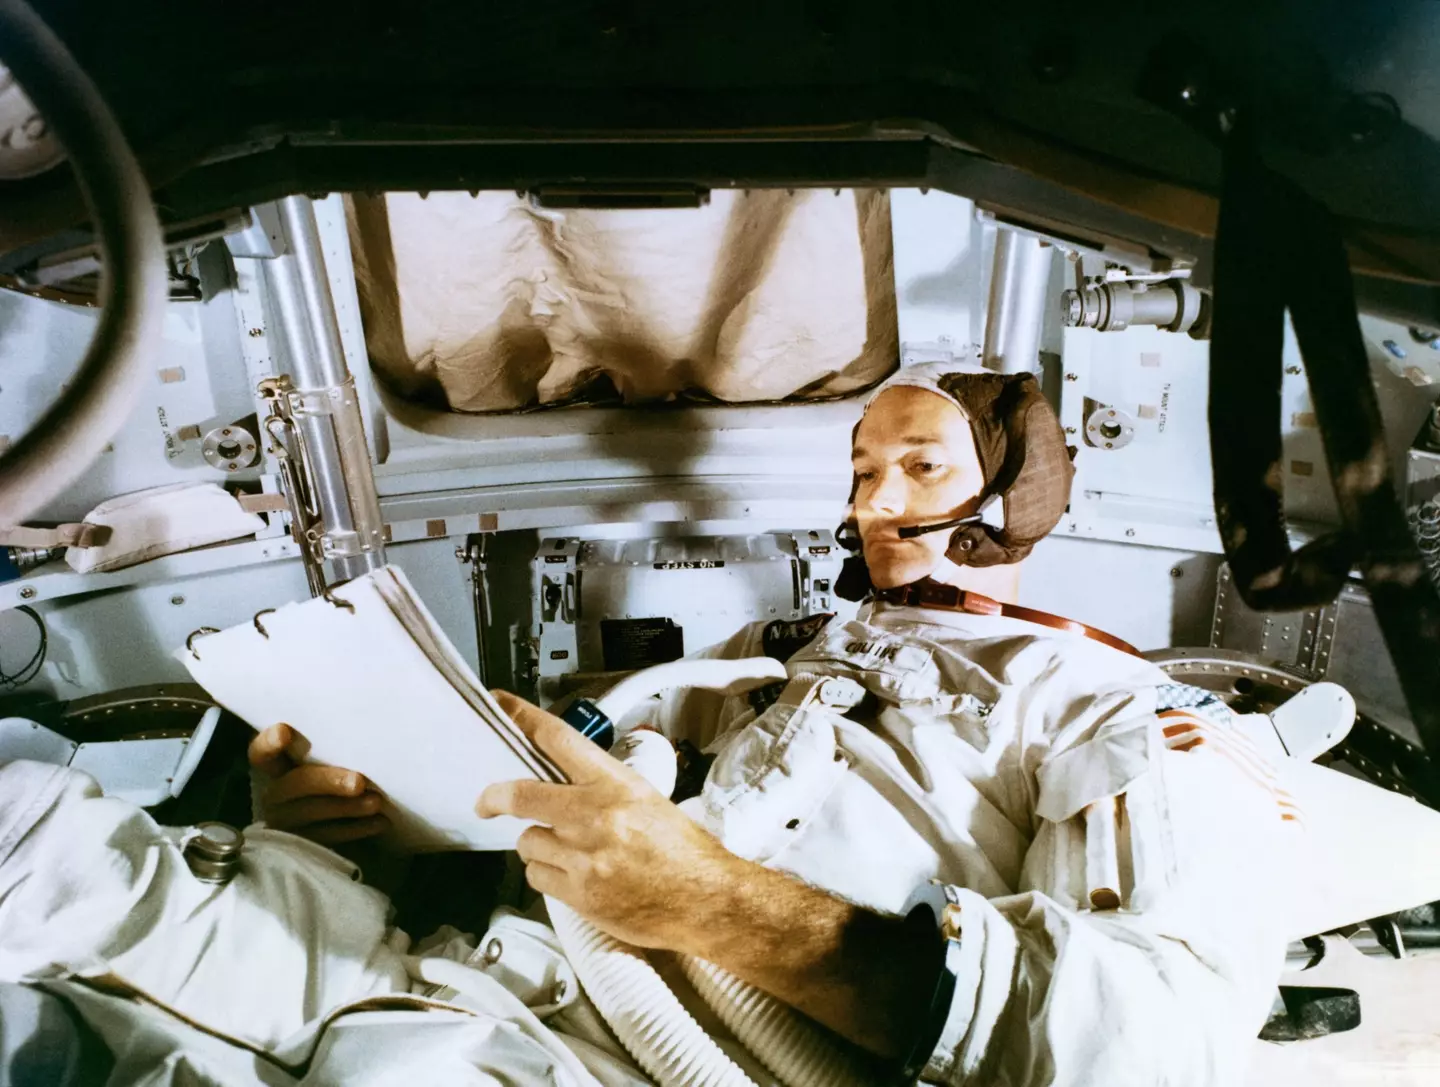 Michael Collins was the third astronaut on the moon mission in 1969 (Bettmann/Getty Images)